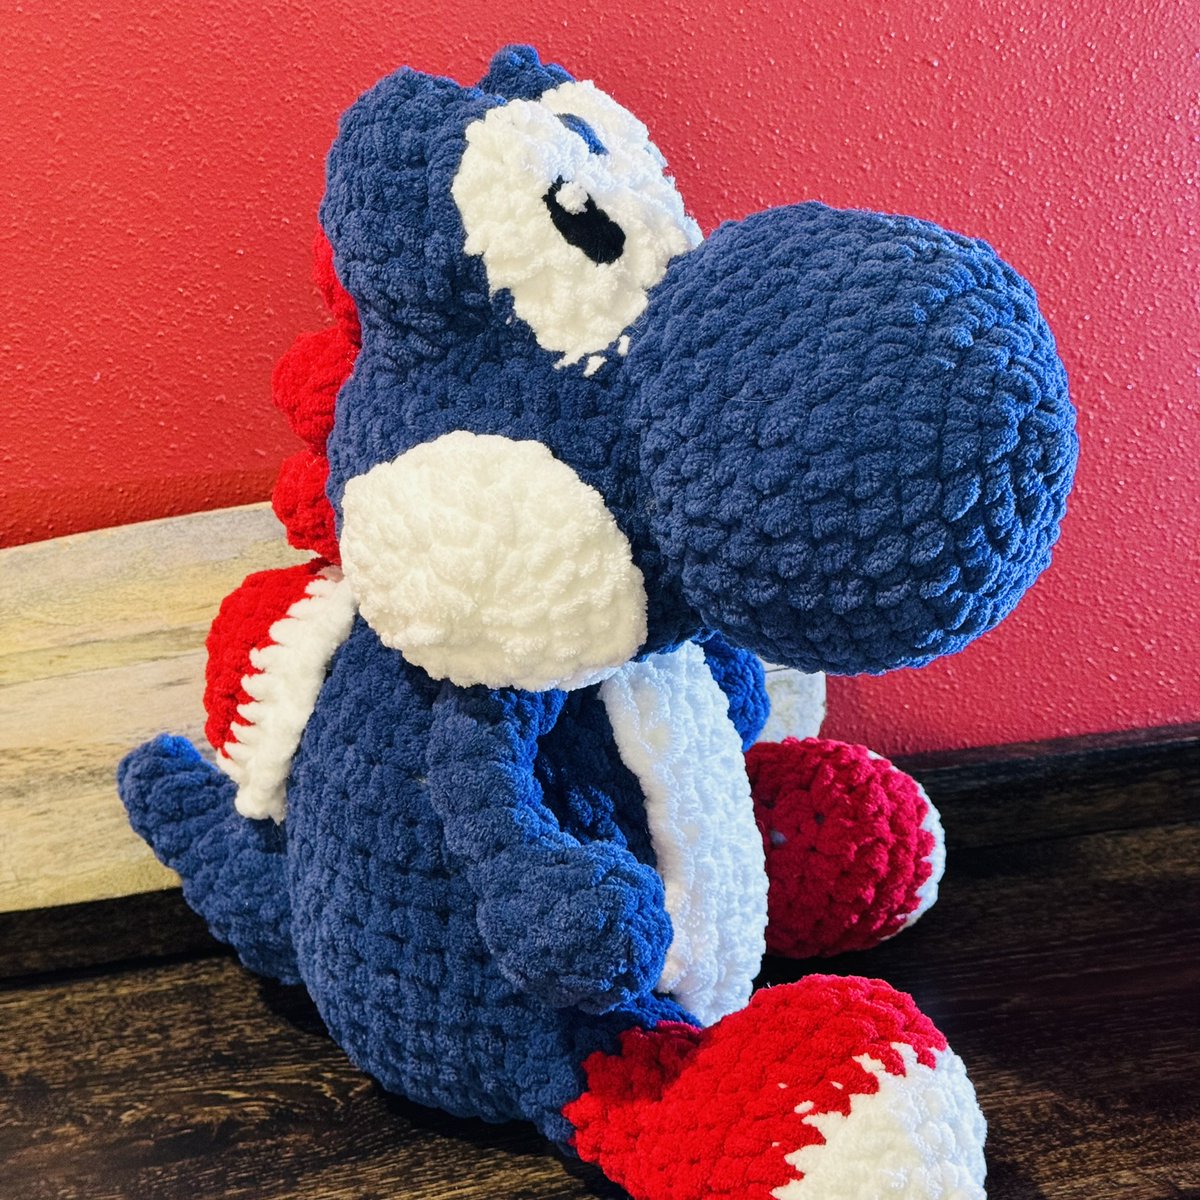 #Yoshi!!! 😍 My oldest made this for me for Christmas. Isn't he sweet! He is also a reminder that my baby is an #amazingartist. From her brilliant mind to a 3-D #crochet creation, what!?! She didn't get that gift from me.😜#mydaughterisanartist #writerslife #Godgivengift